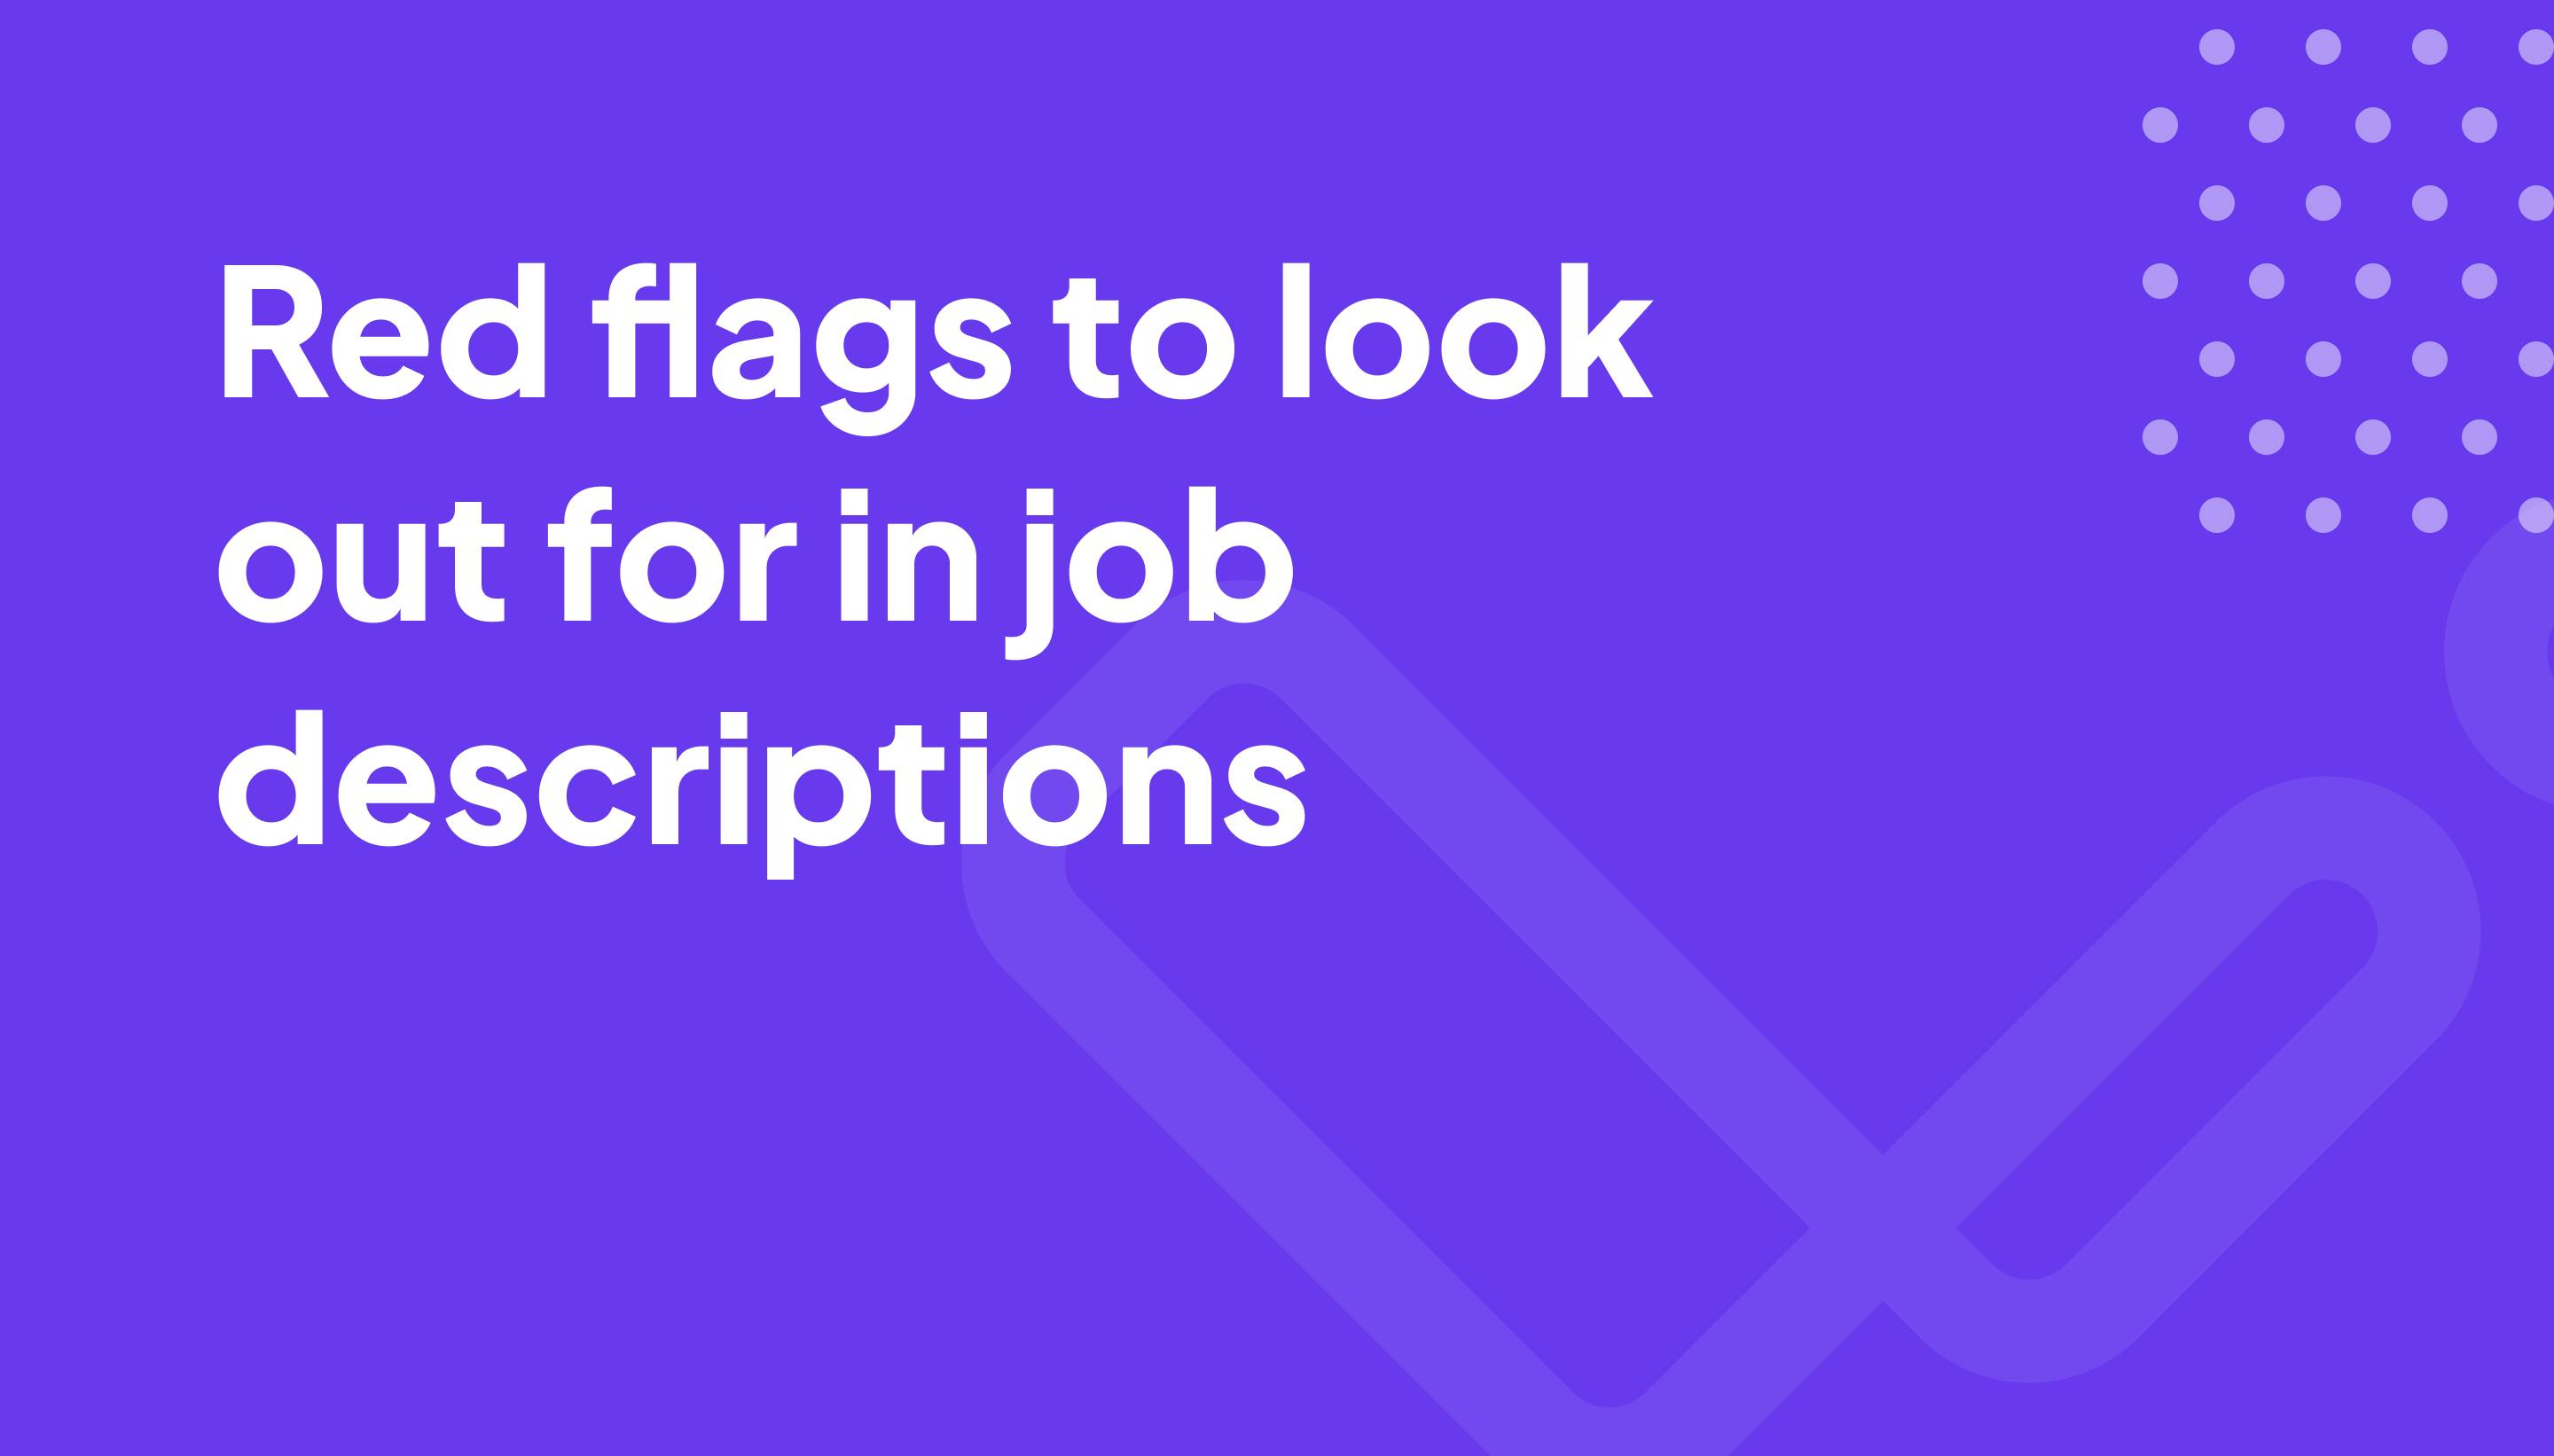 Four red flags to look out for in job descriptions